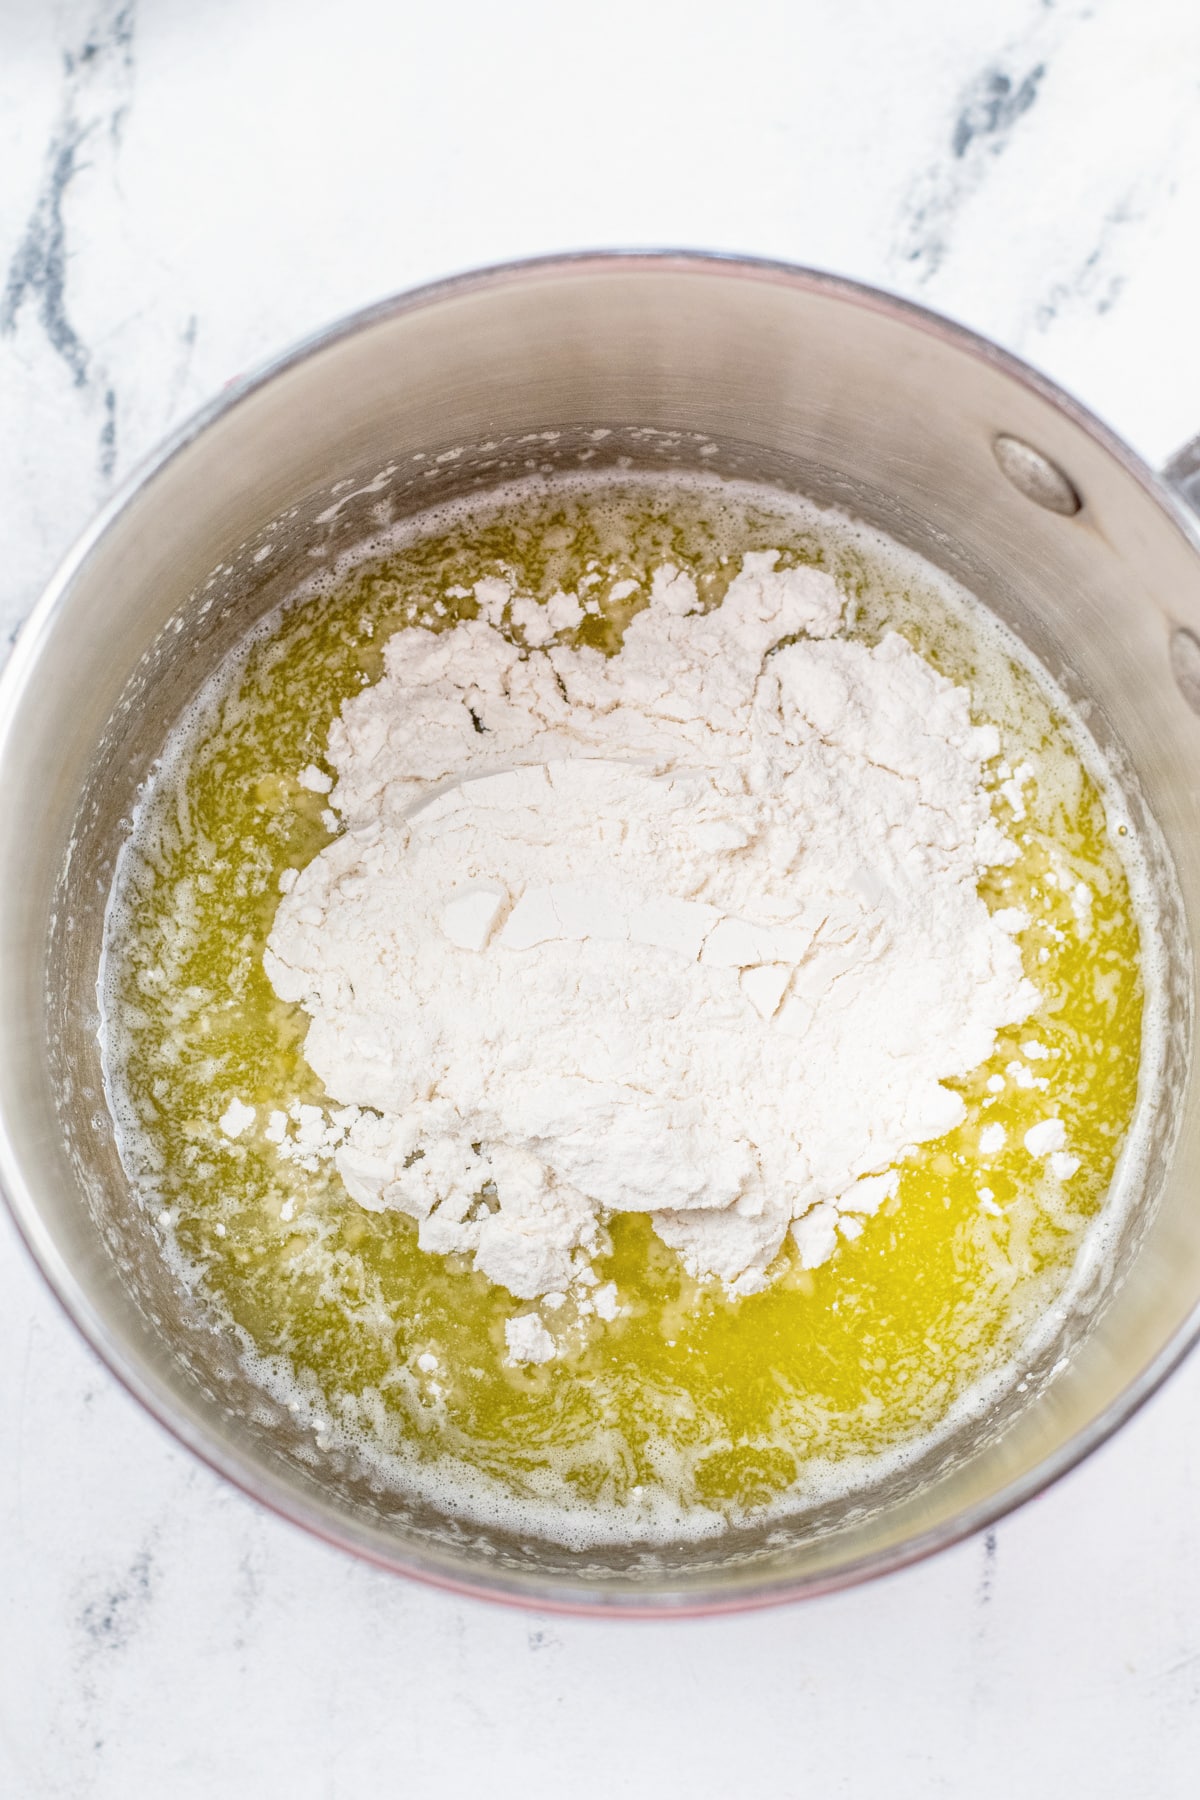 whisk flour into melted butter